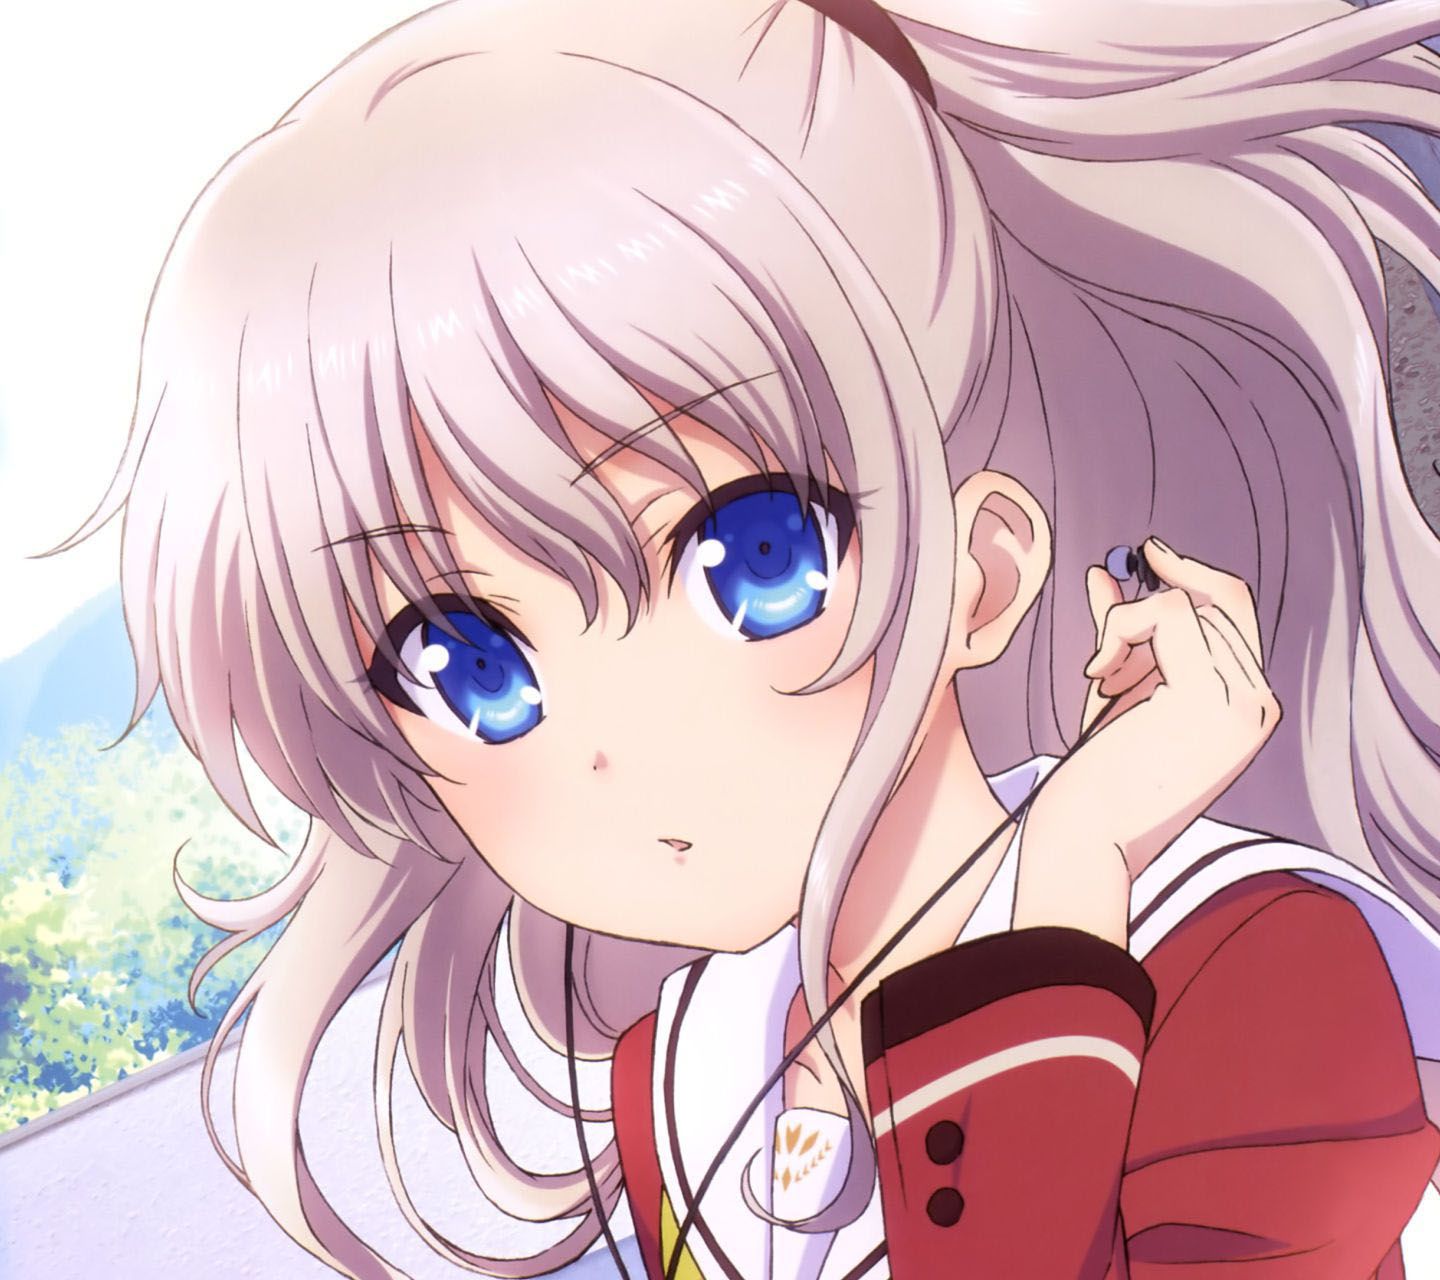 Charlotte シャーロット Android壁紙 3 友利奈緒 アニメ壁紙ネット Pc Android Iphone壁紙 画像